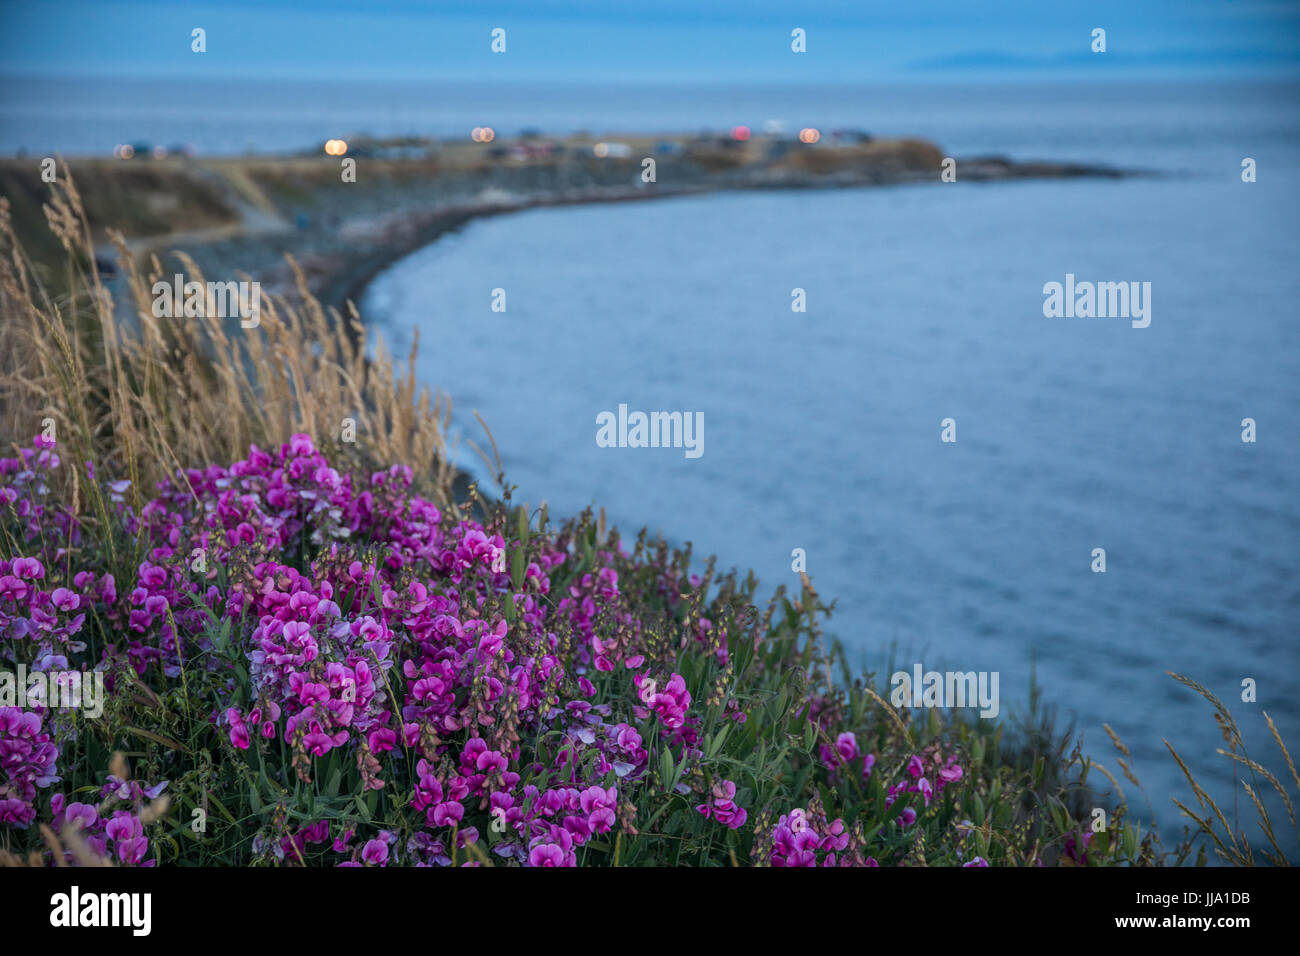 A view of coast along Clover Point park in Victoria, BC, Canada. Stock Photo